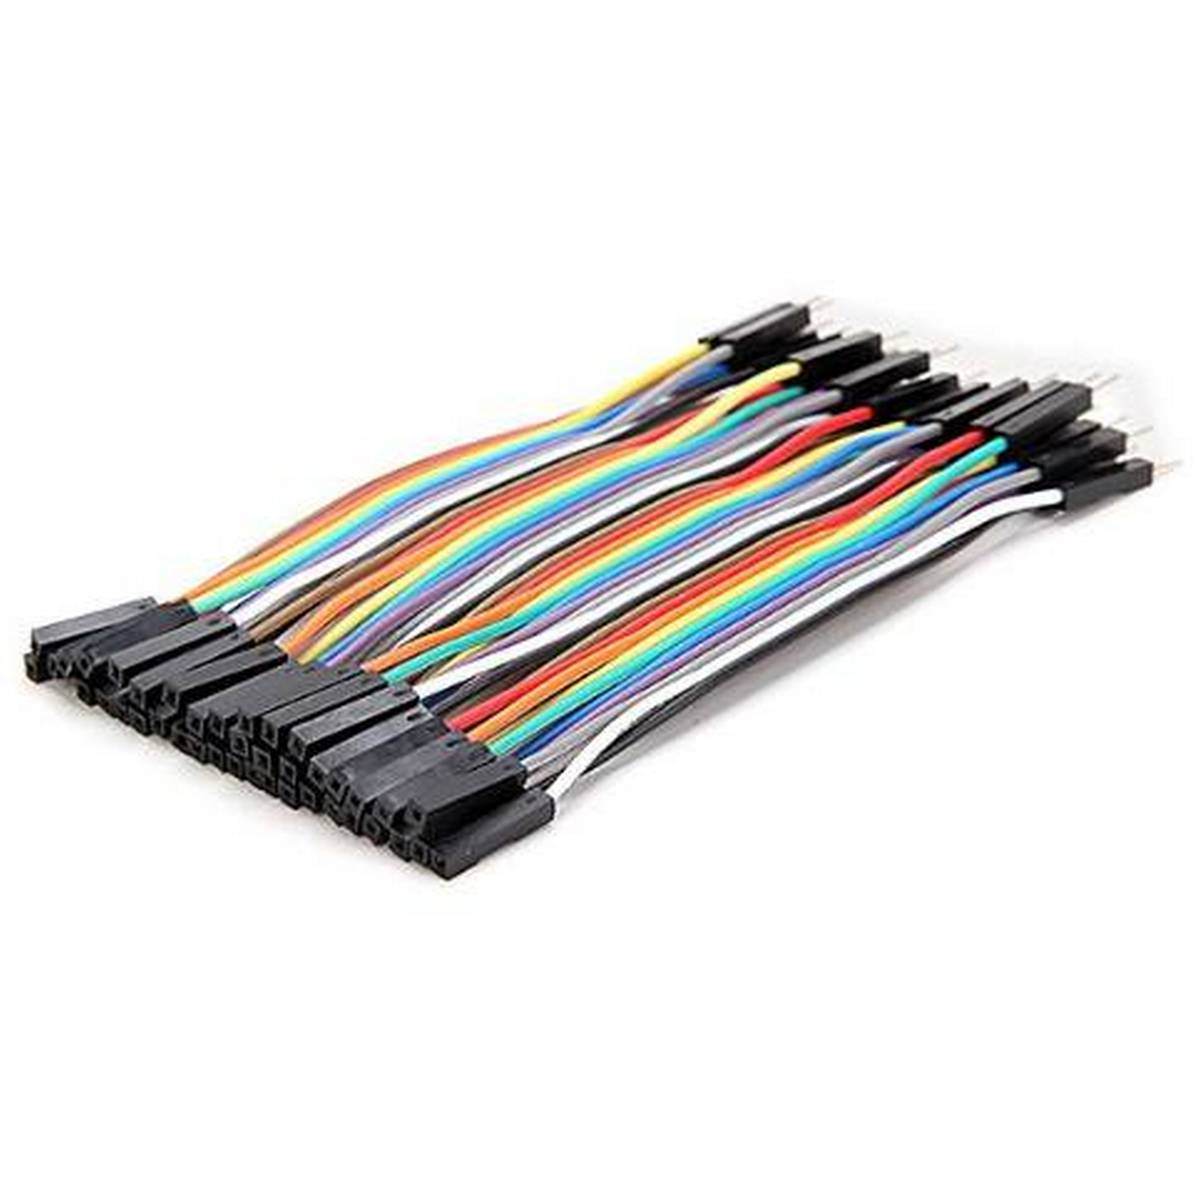 Jumper Wires 40 Pins Male To Female - 10cm For Breadboard, Arduino